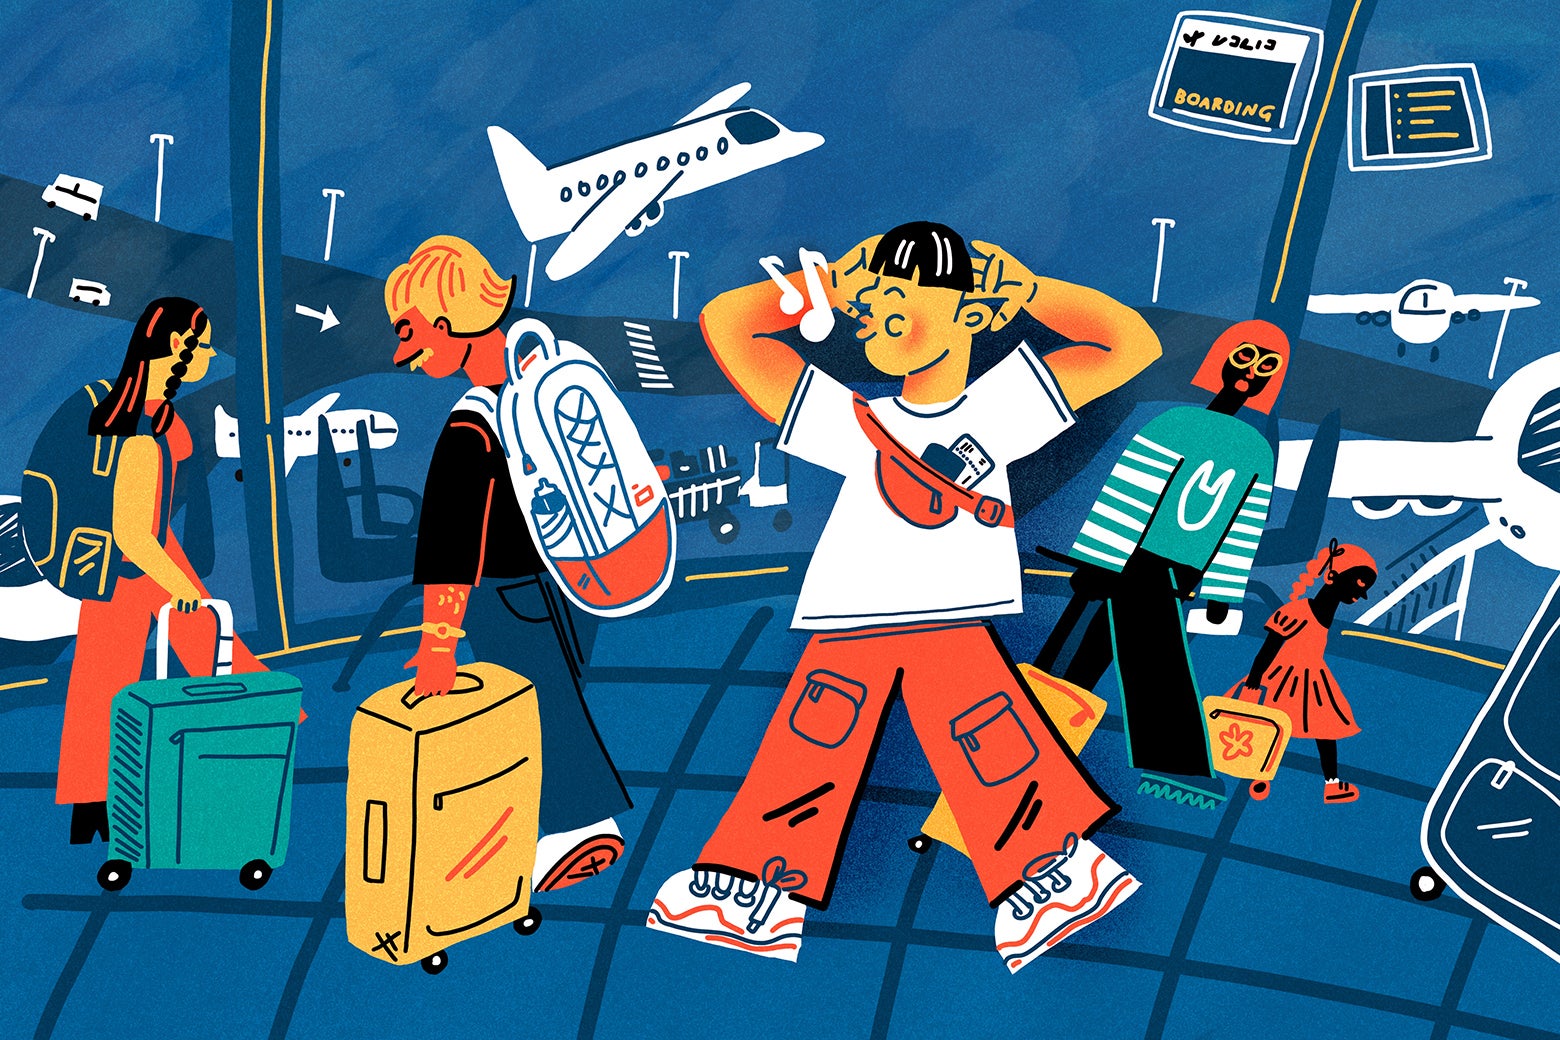 An illustration of an empty-handed, fashionably dressed passenger whistling through the crowded airport. 